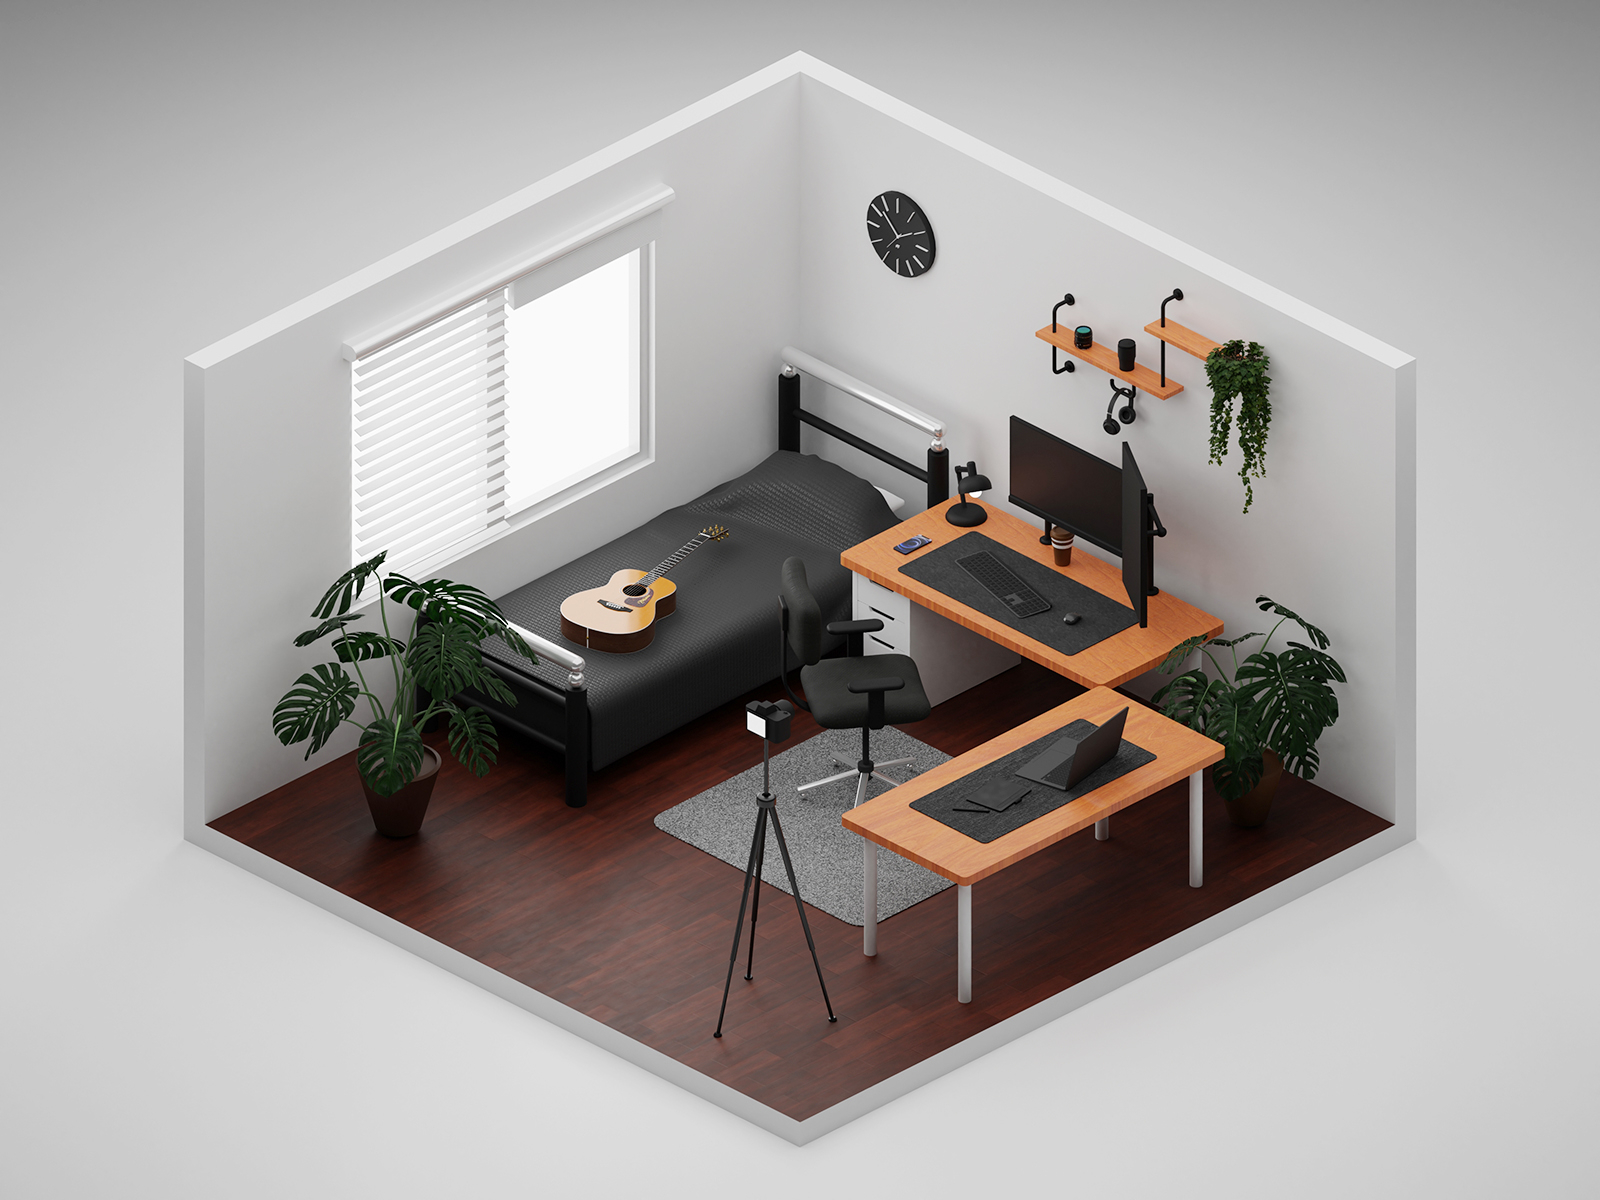 Home Studio 3D Isometric Model room laptop pc job work from home remote work workspace work studio home studio home cycles blender 3d illustration architecture isometric 3d isometric design illustration 3d